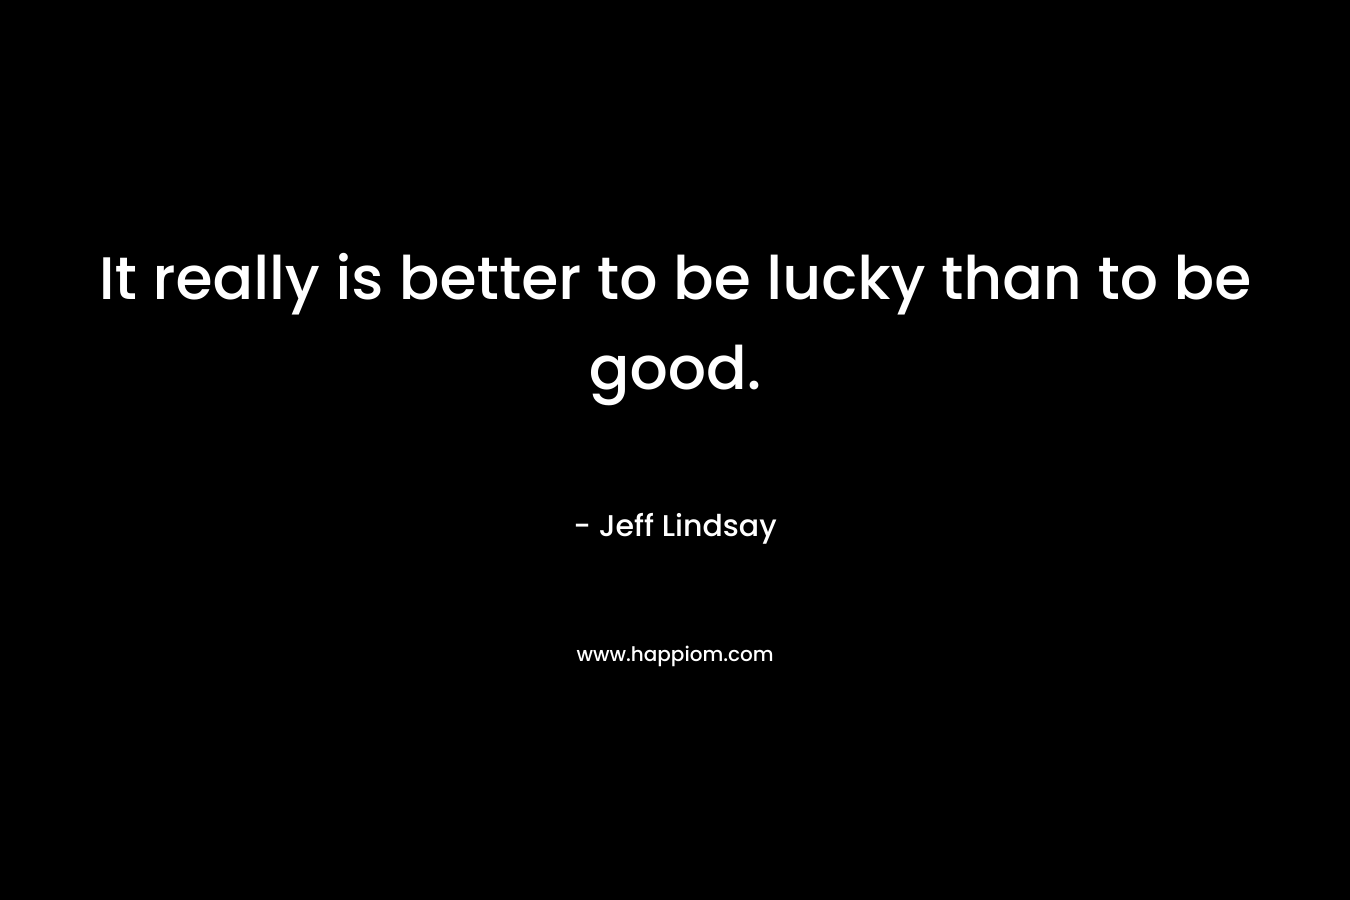 It really is better to be lucky than to be good.